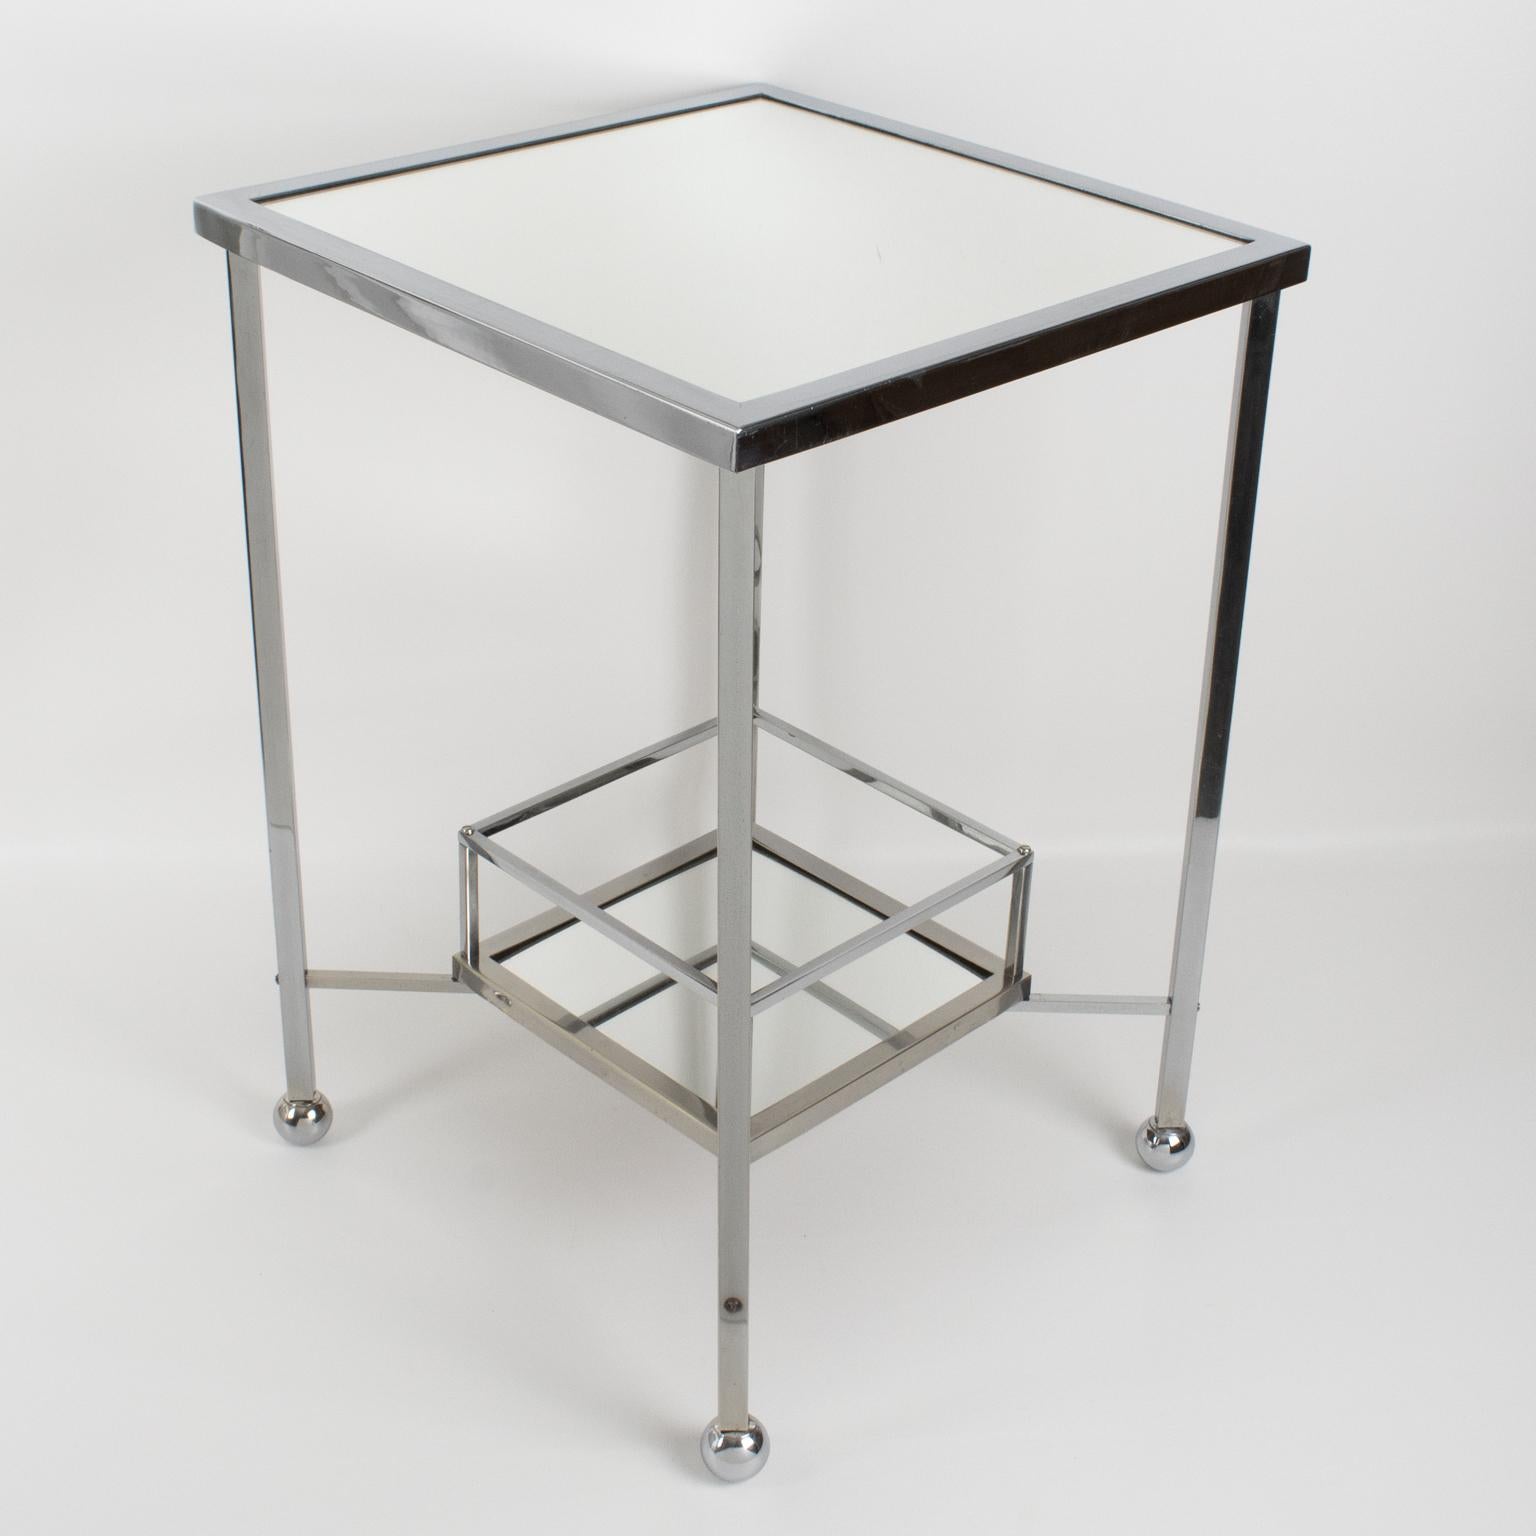 Mid-20th Century Jacques Adnet Art Deco Chrome and Mirror Side Bar Table, France 1930s For Sale